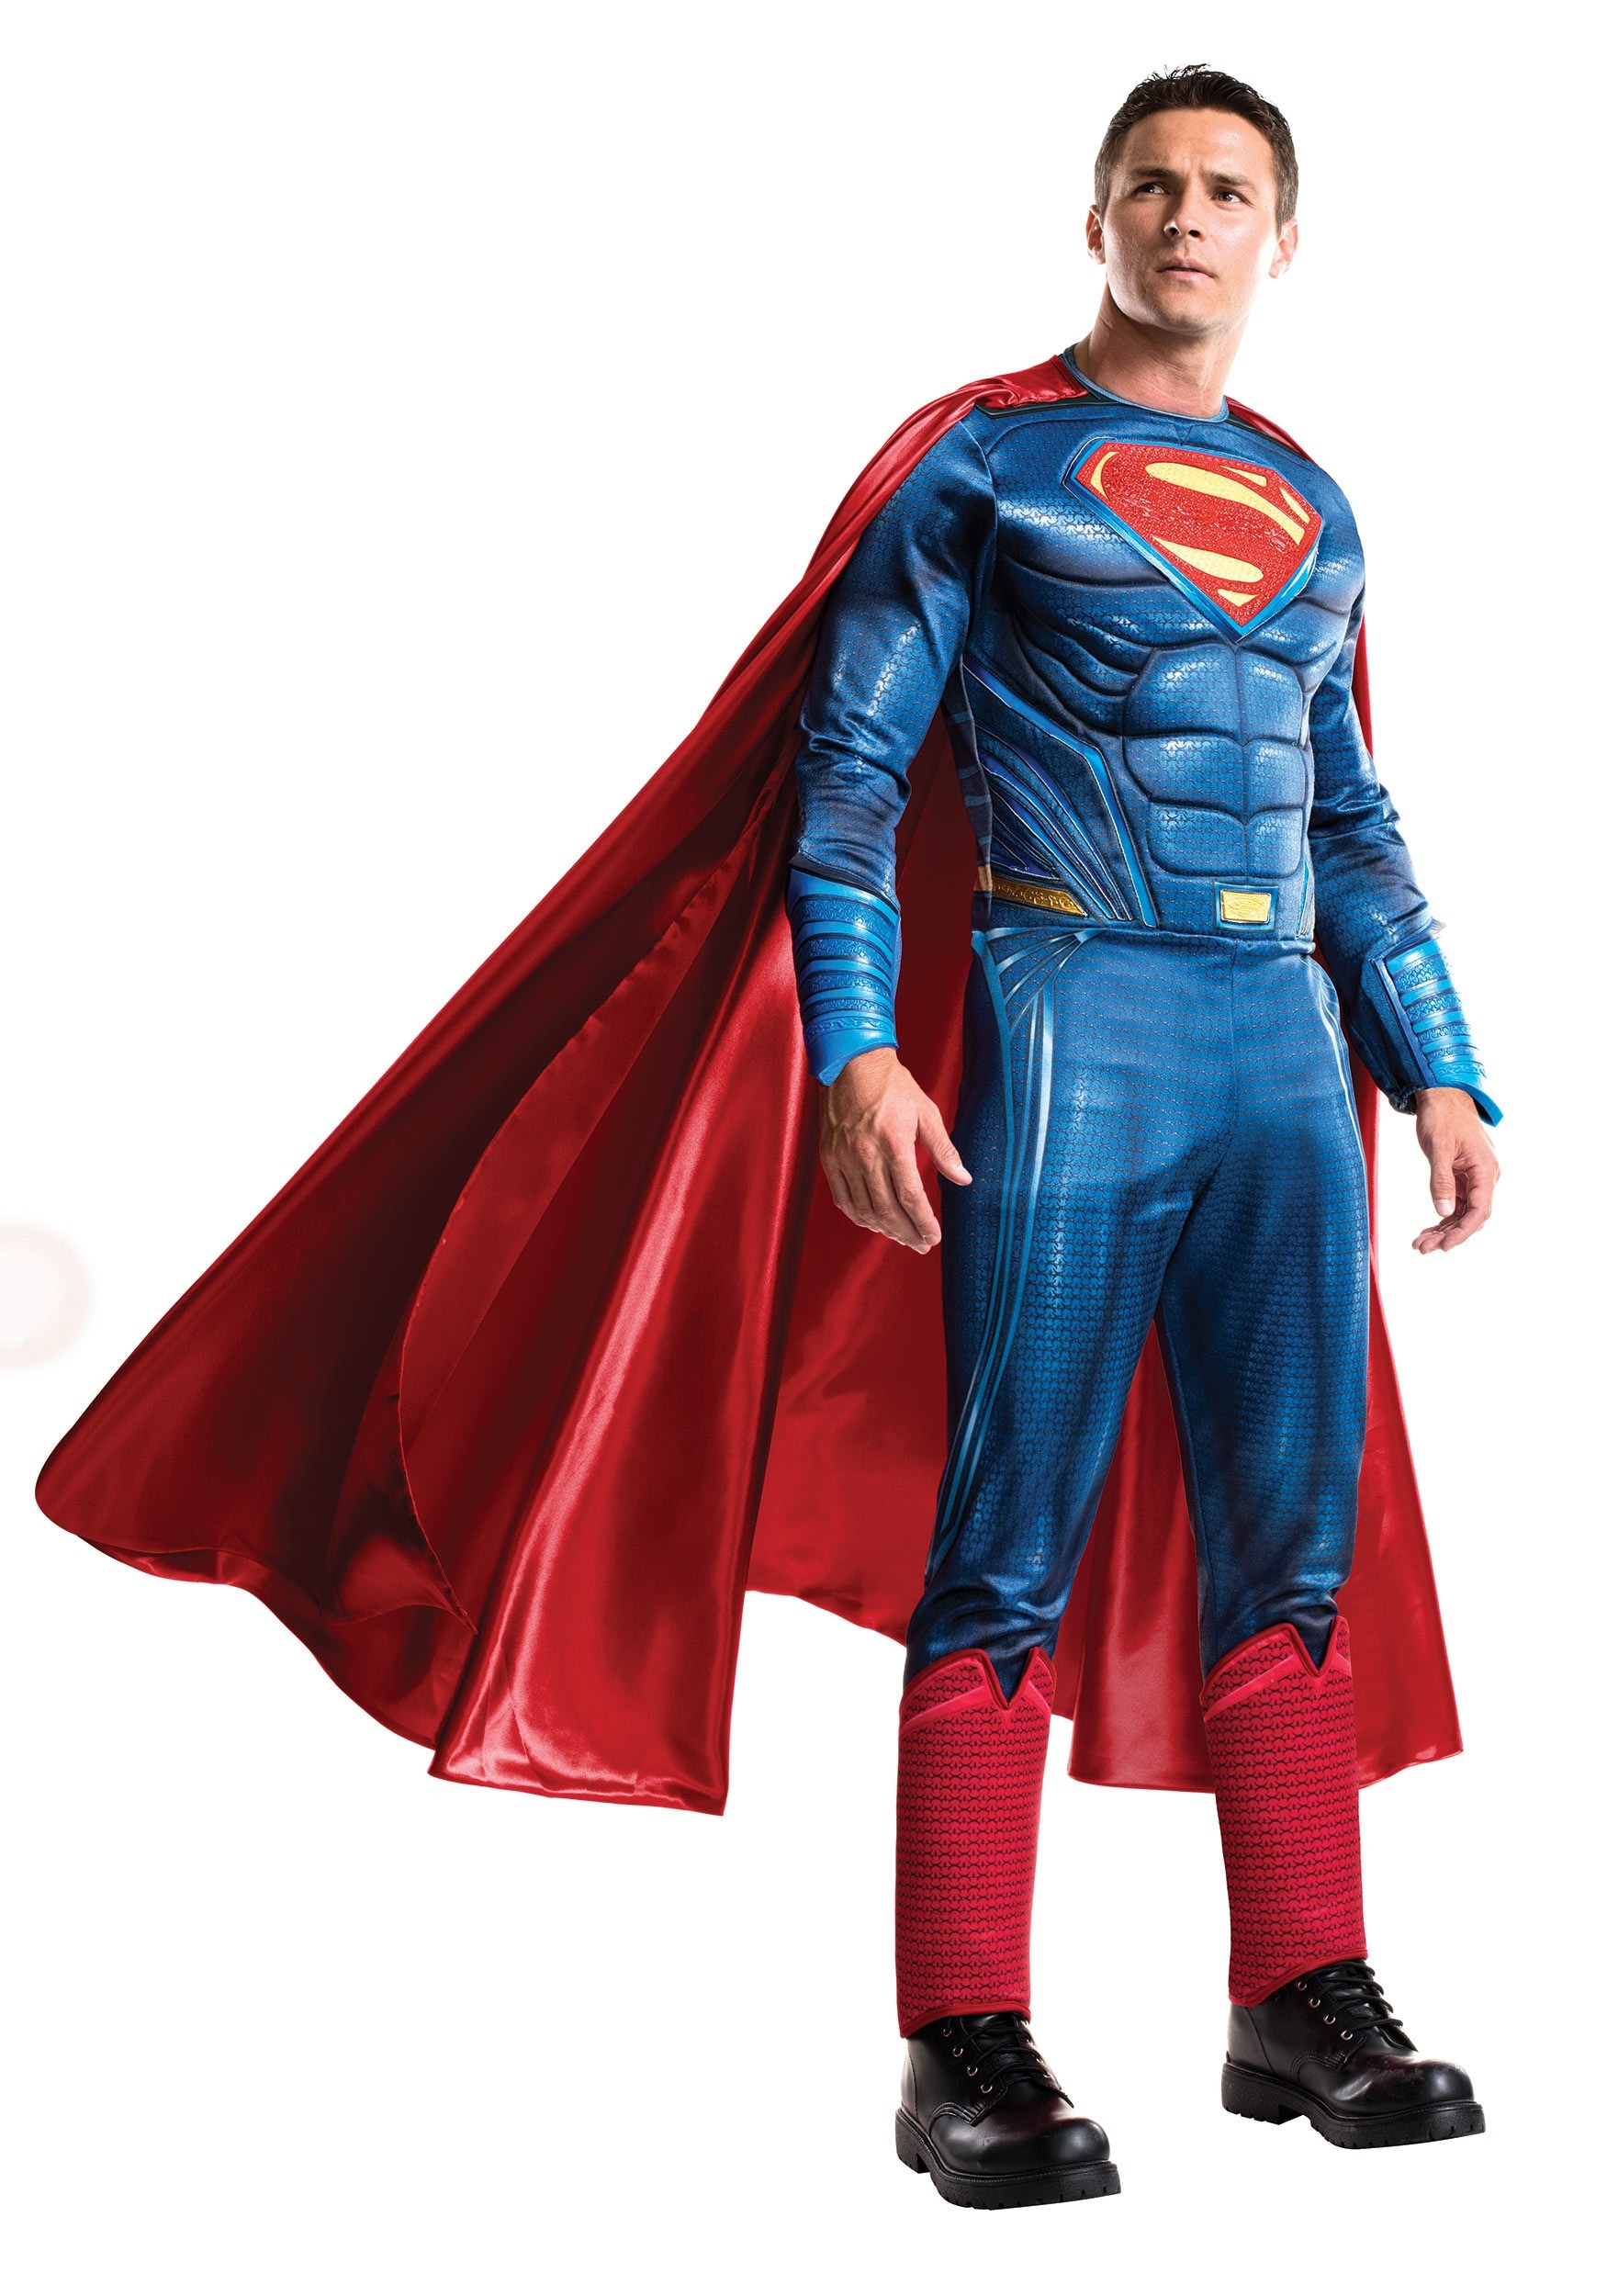 Image of Rubies Costume Co. Inc Superman Dawn of Justice Grand Heritage Costume for Men